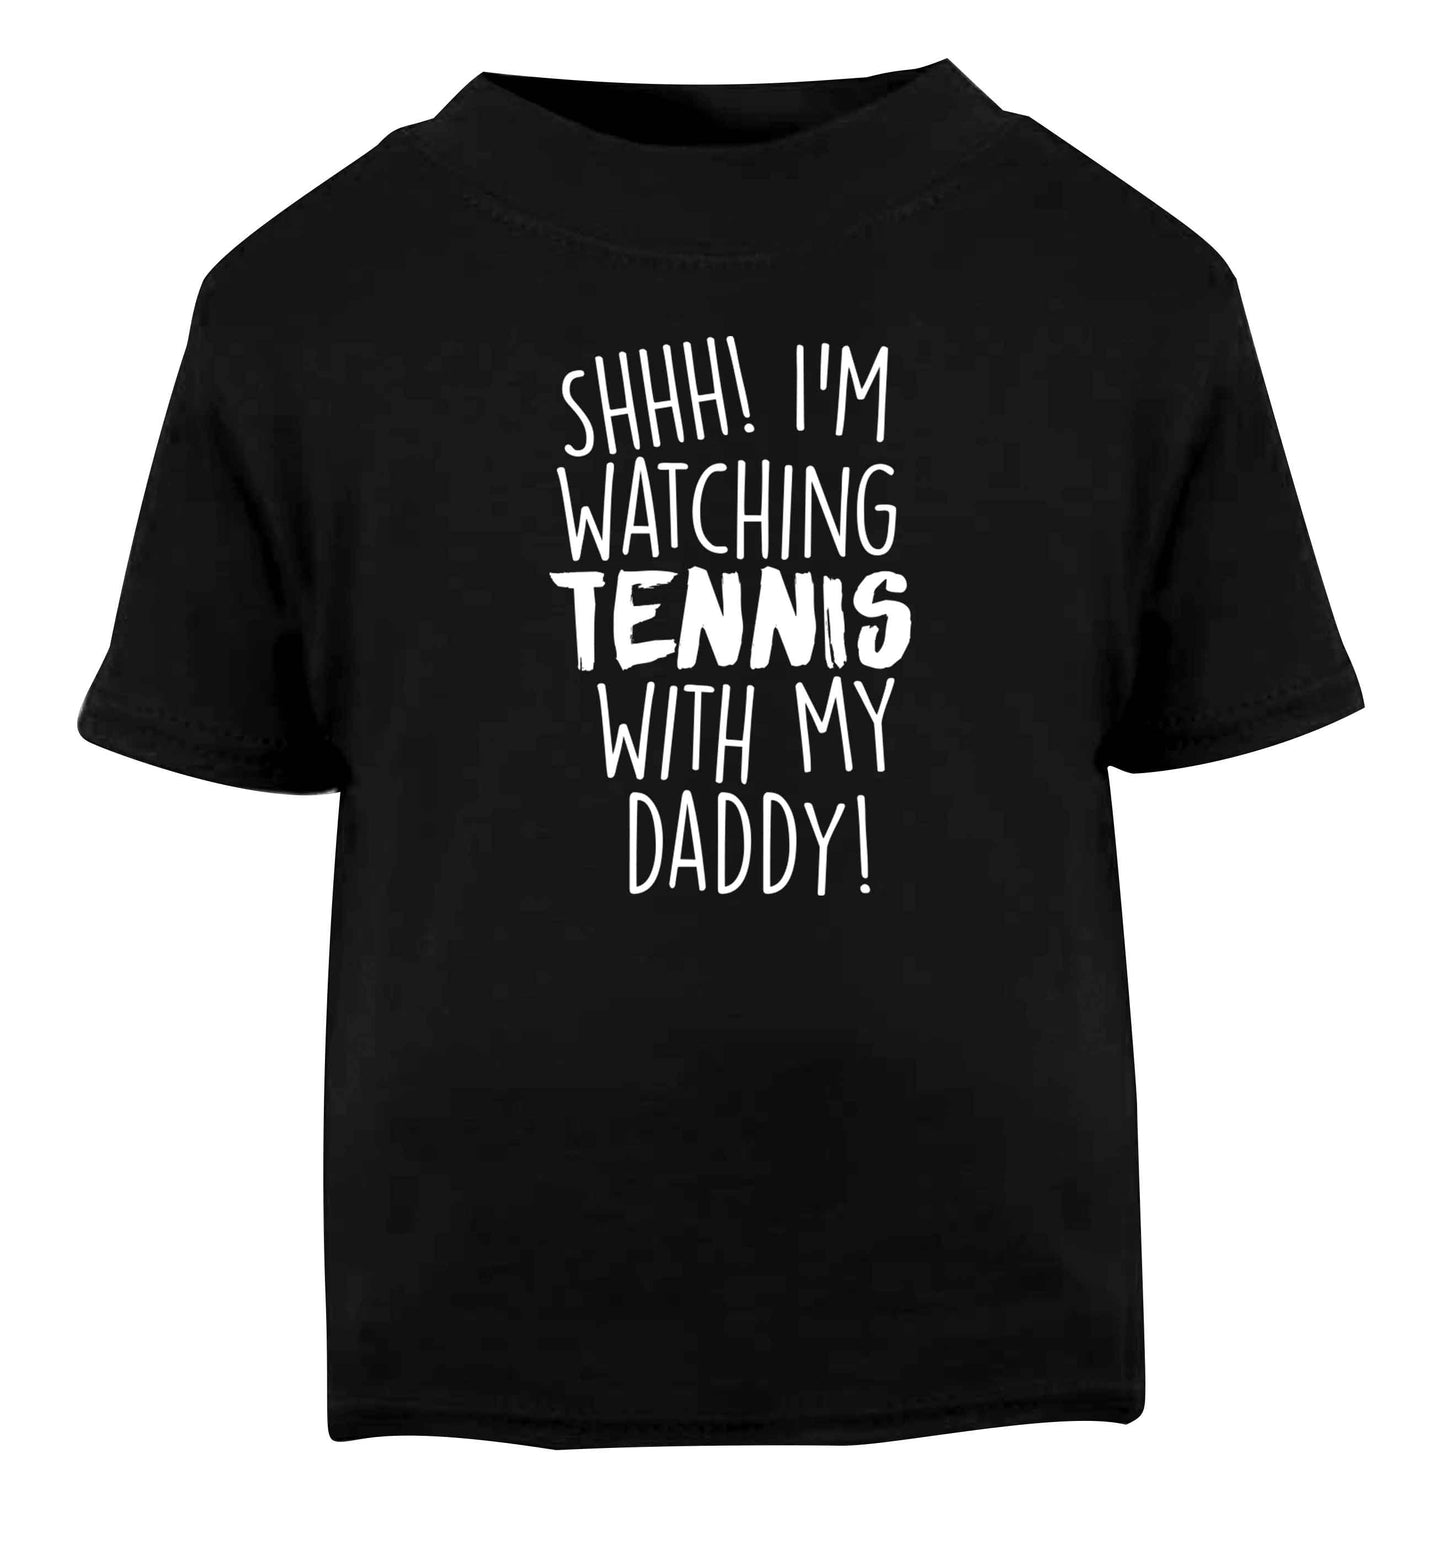 Shh! I'm watching tennis with my daddy! Black Baby Toddler Tshirt 2 years